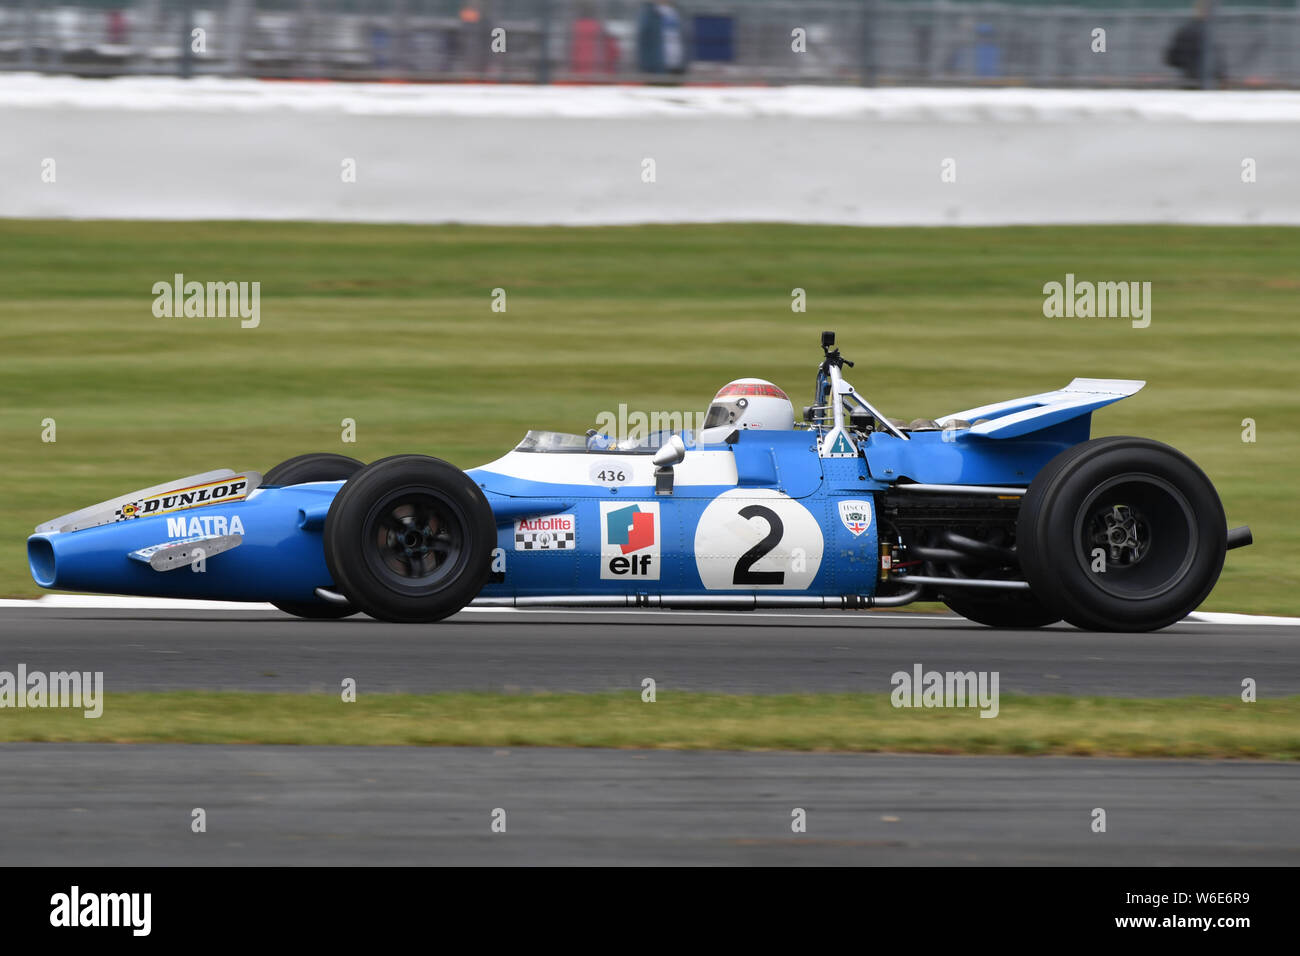 Sir Jackie Stewart OBE drives his 1969 Matra MS80-02 Formula One car at the  2019 Silverstone Classic Stock Photo - Alamy